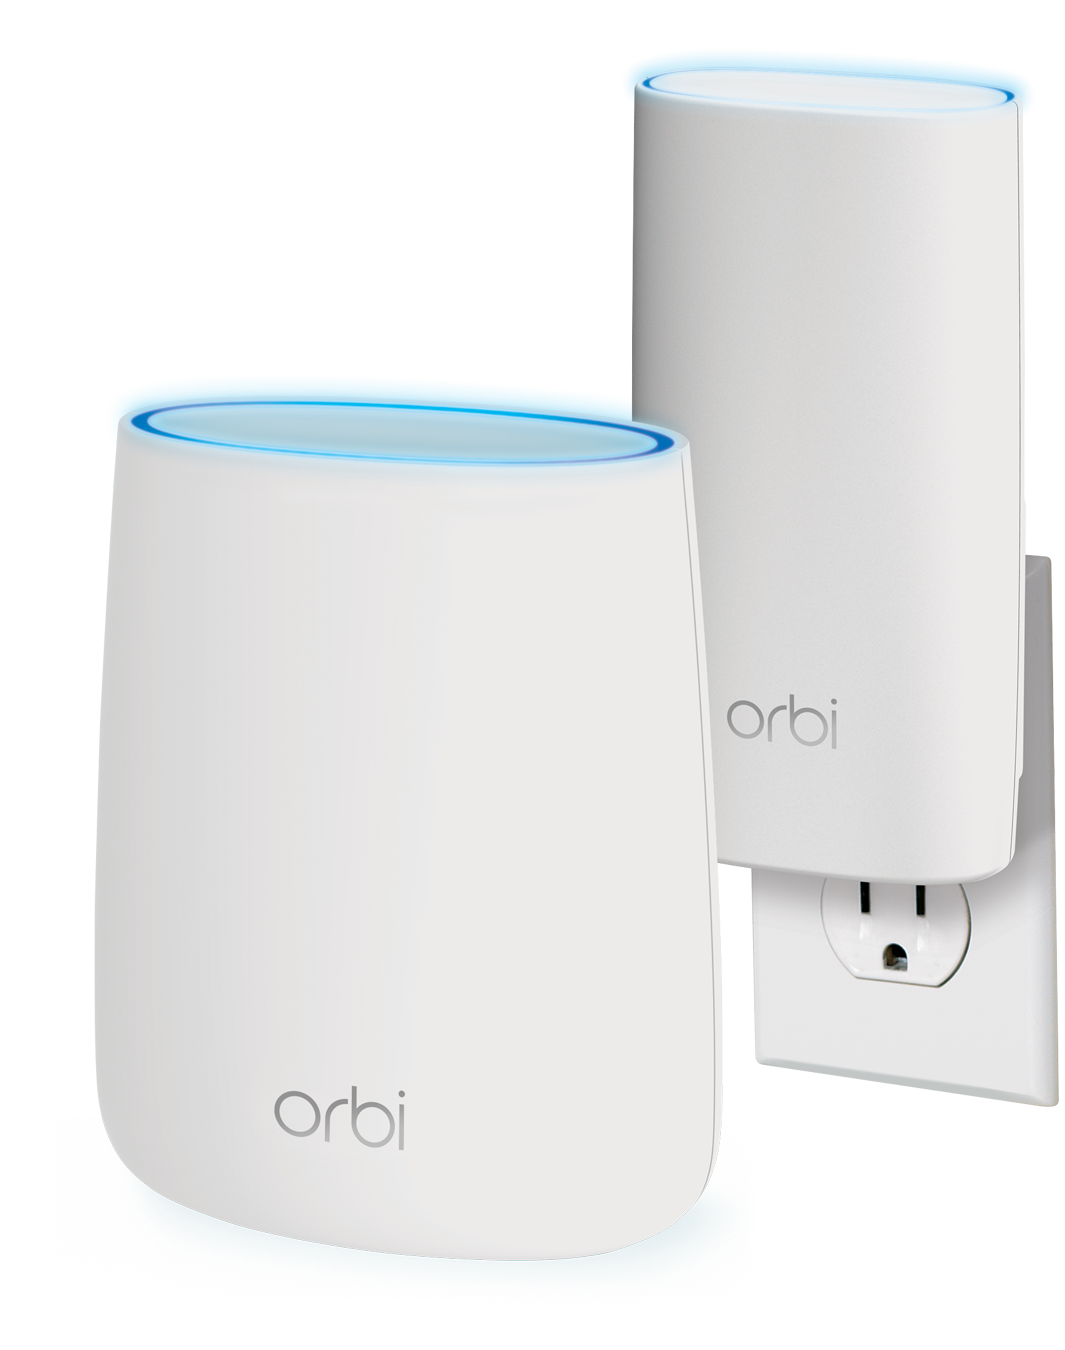 NETGEAR - Orbi RBK20W AC2200 Tri-band WiFi Mesh System with Router and Wall Plug Satellite Extender - image 1 of 5